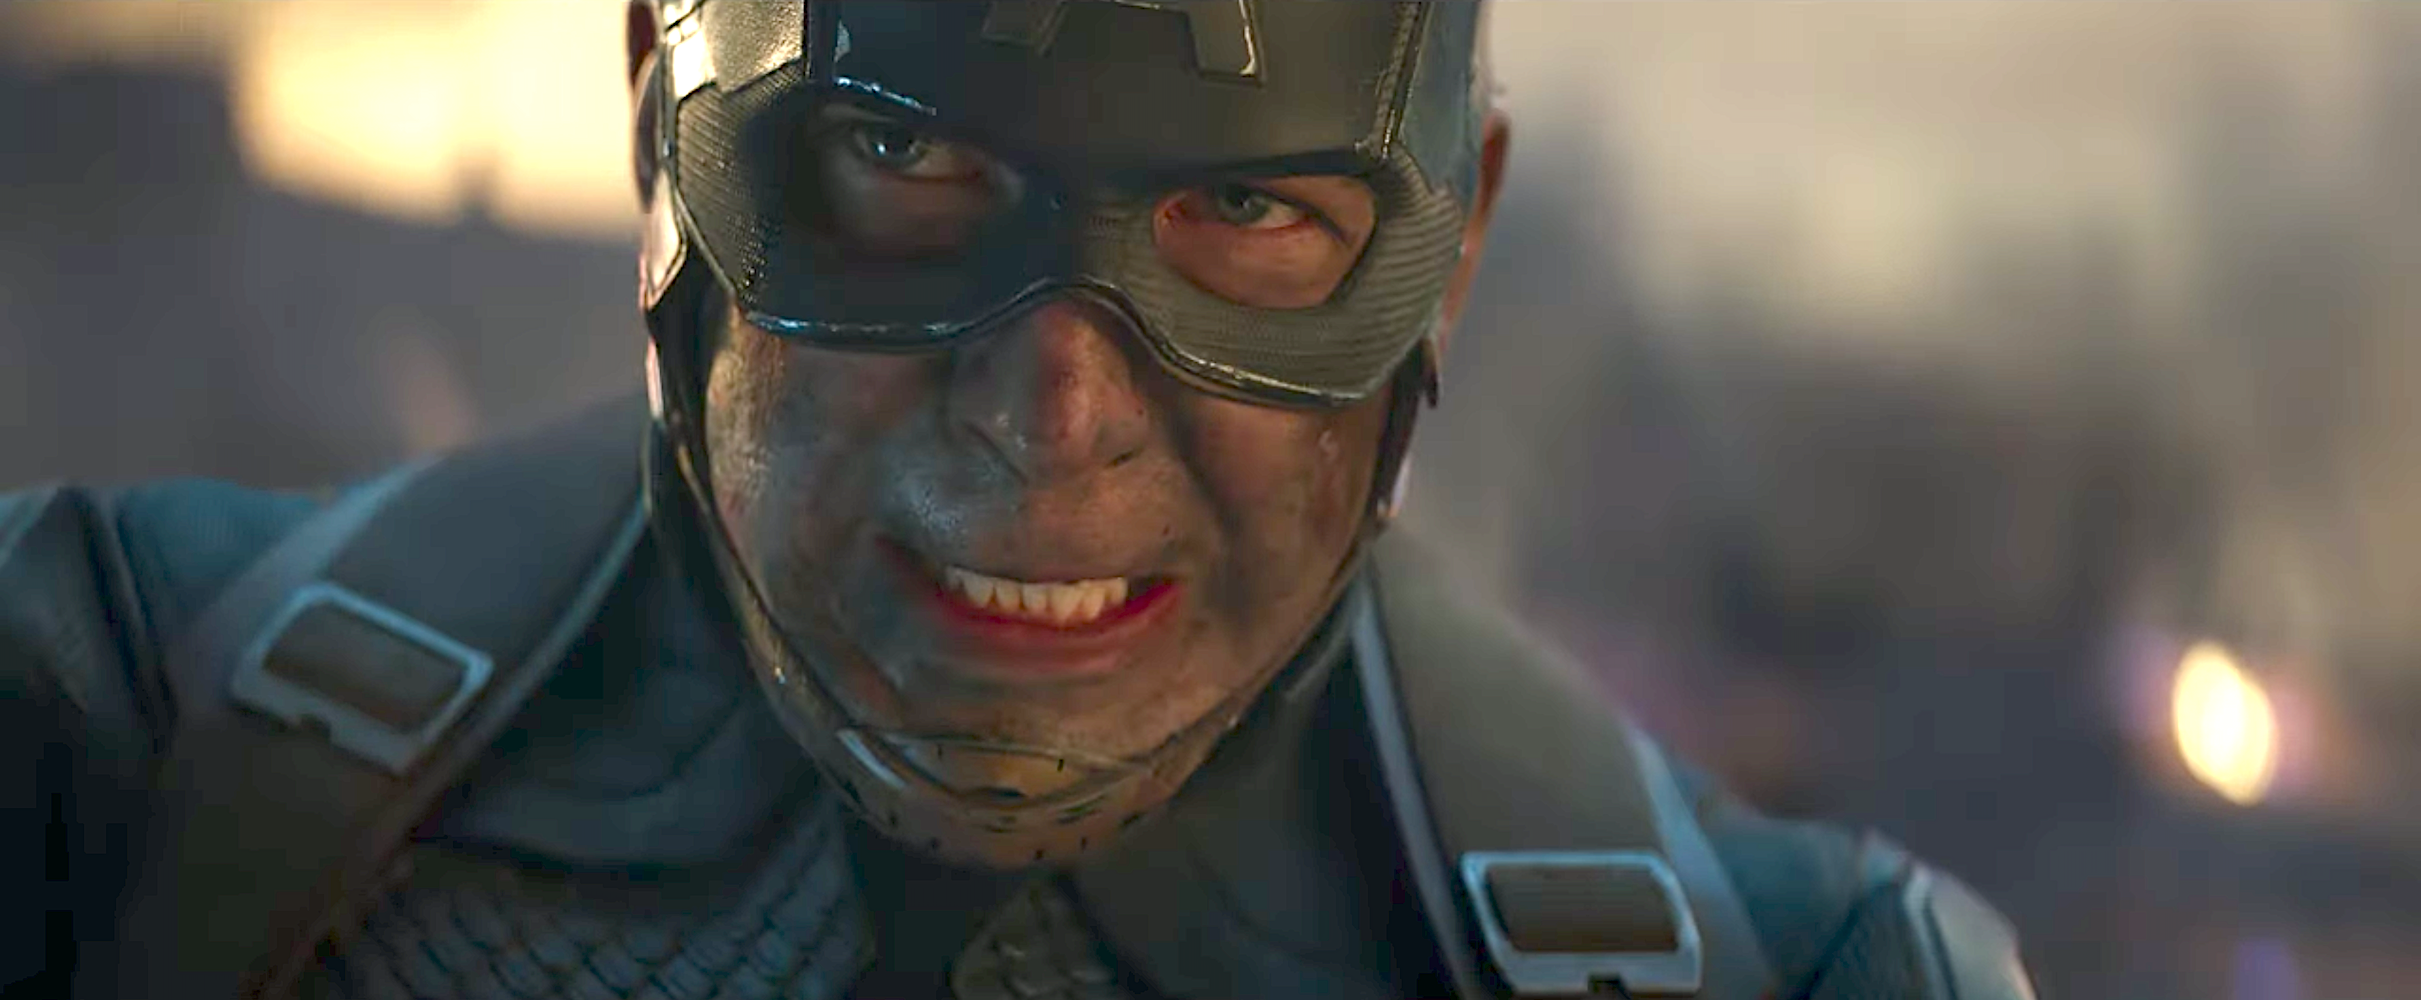 Avengers Endgame: Will Captain America and Iron Man Die? Marvel hints